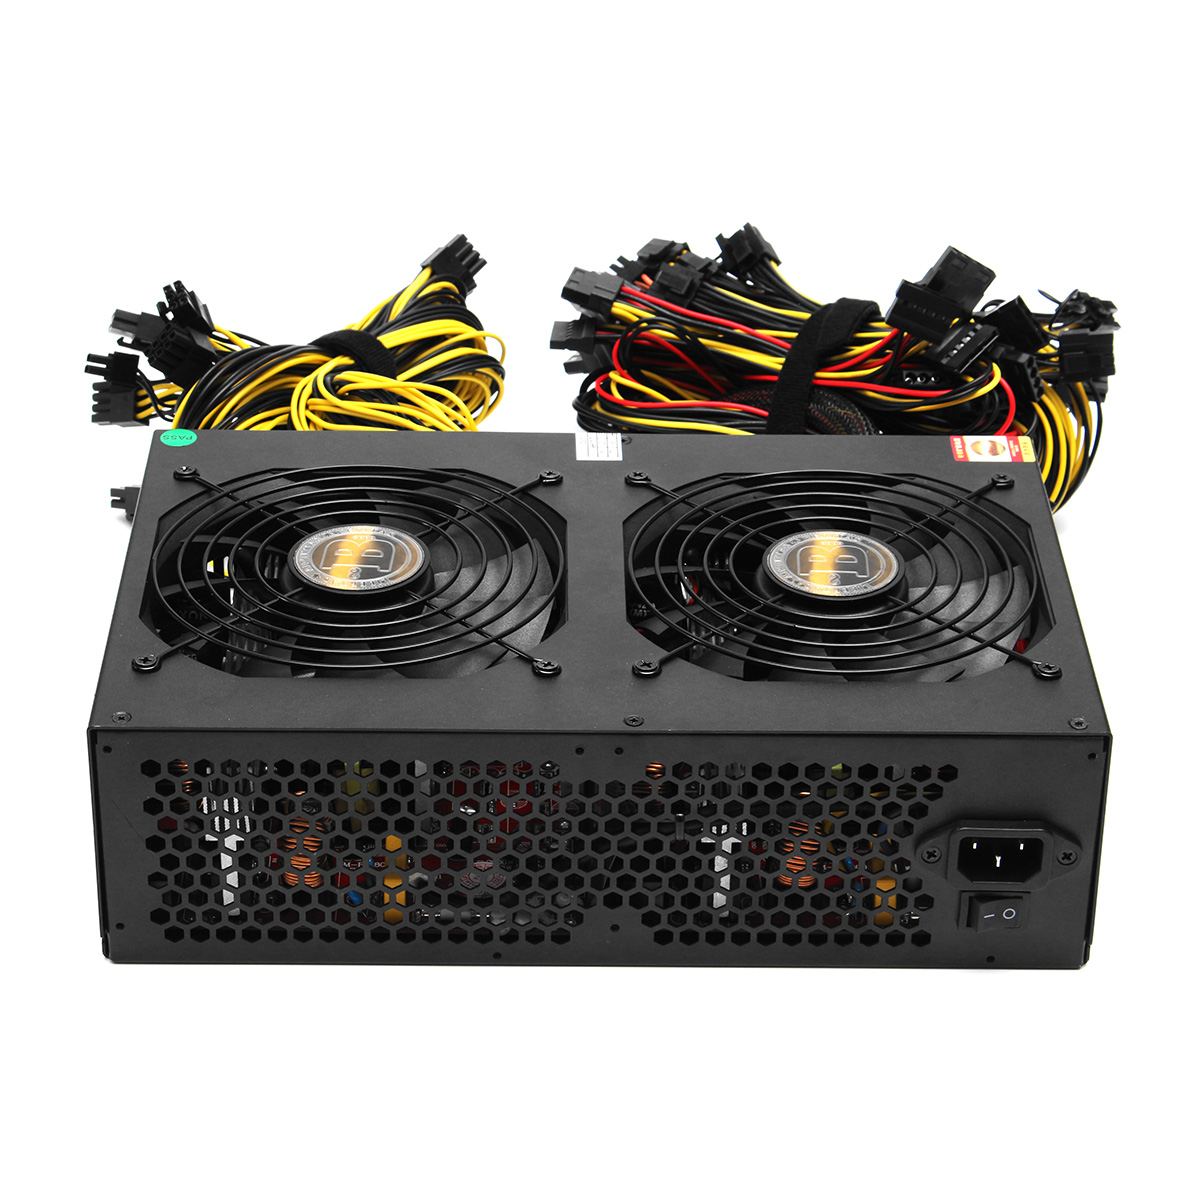 Find 3450W Miner Power Supply 140mm Cooling Fan ATX 12V Version 2 31 Computer Power Supply Mining for BTC Bitcoin Mining Server for Sale on Gipsybee.com with cryptocurrencies